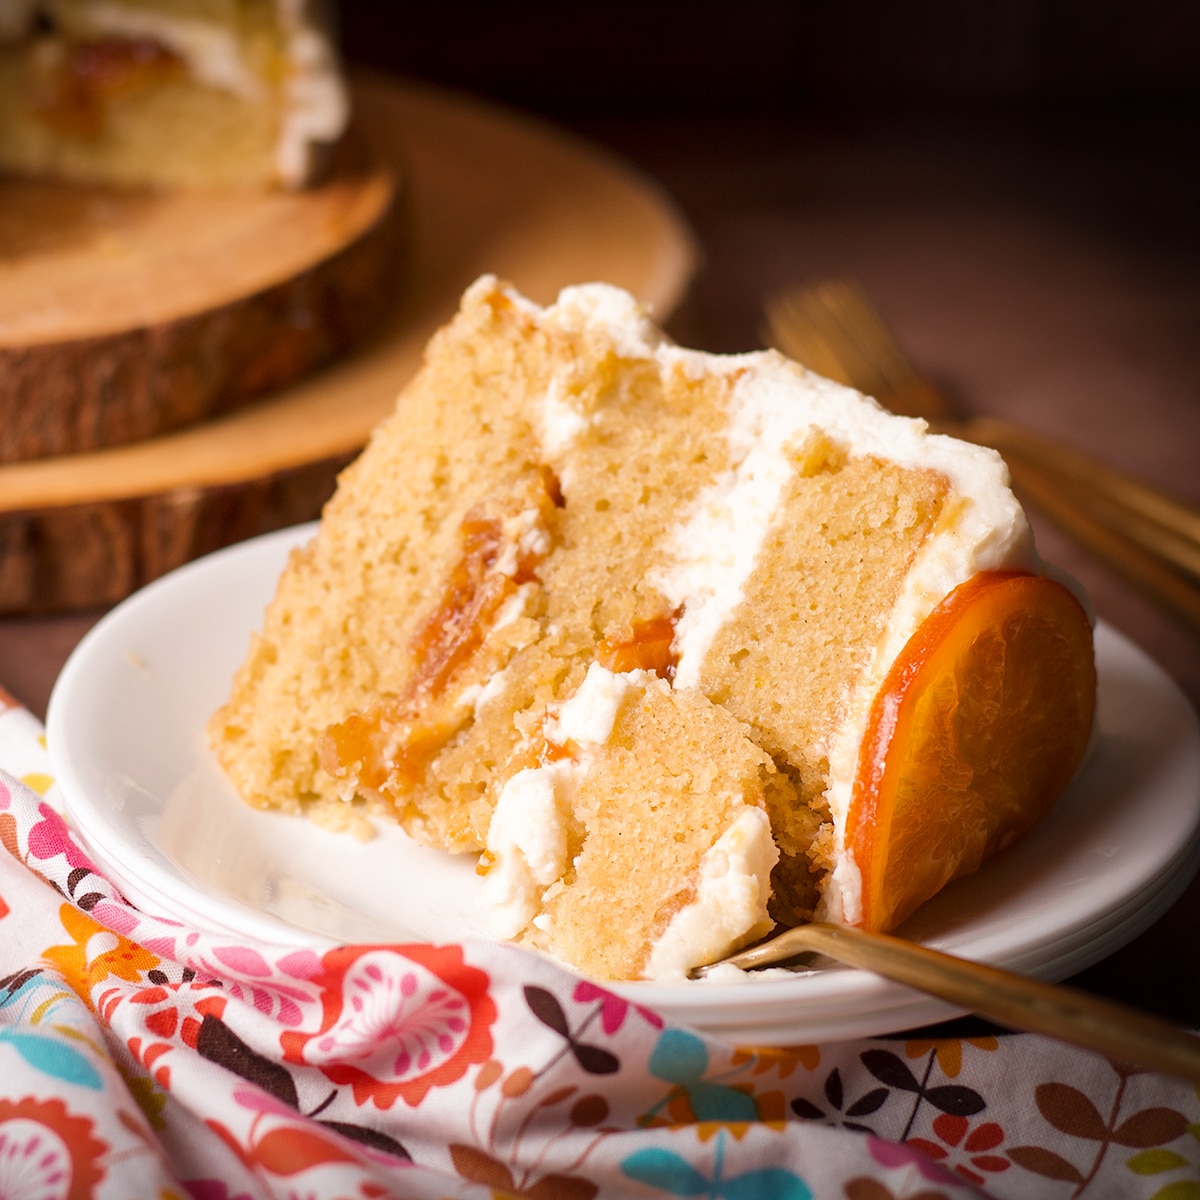 A slice of 3-layer orange olive oil cake filled with orange marmalade and covered in mascarpone frosting.